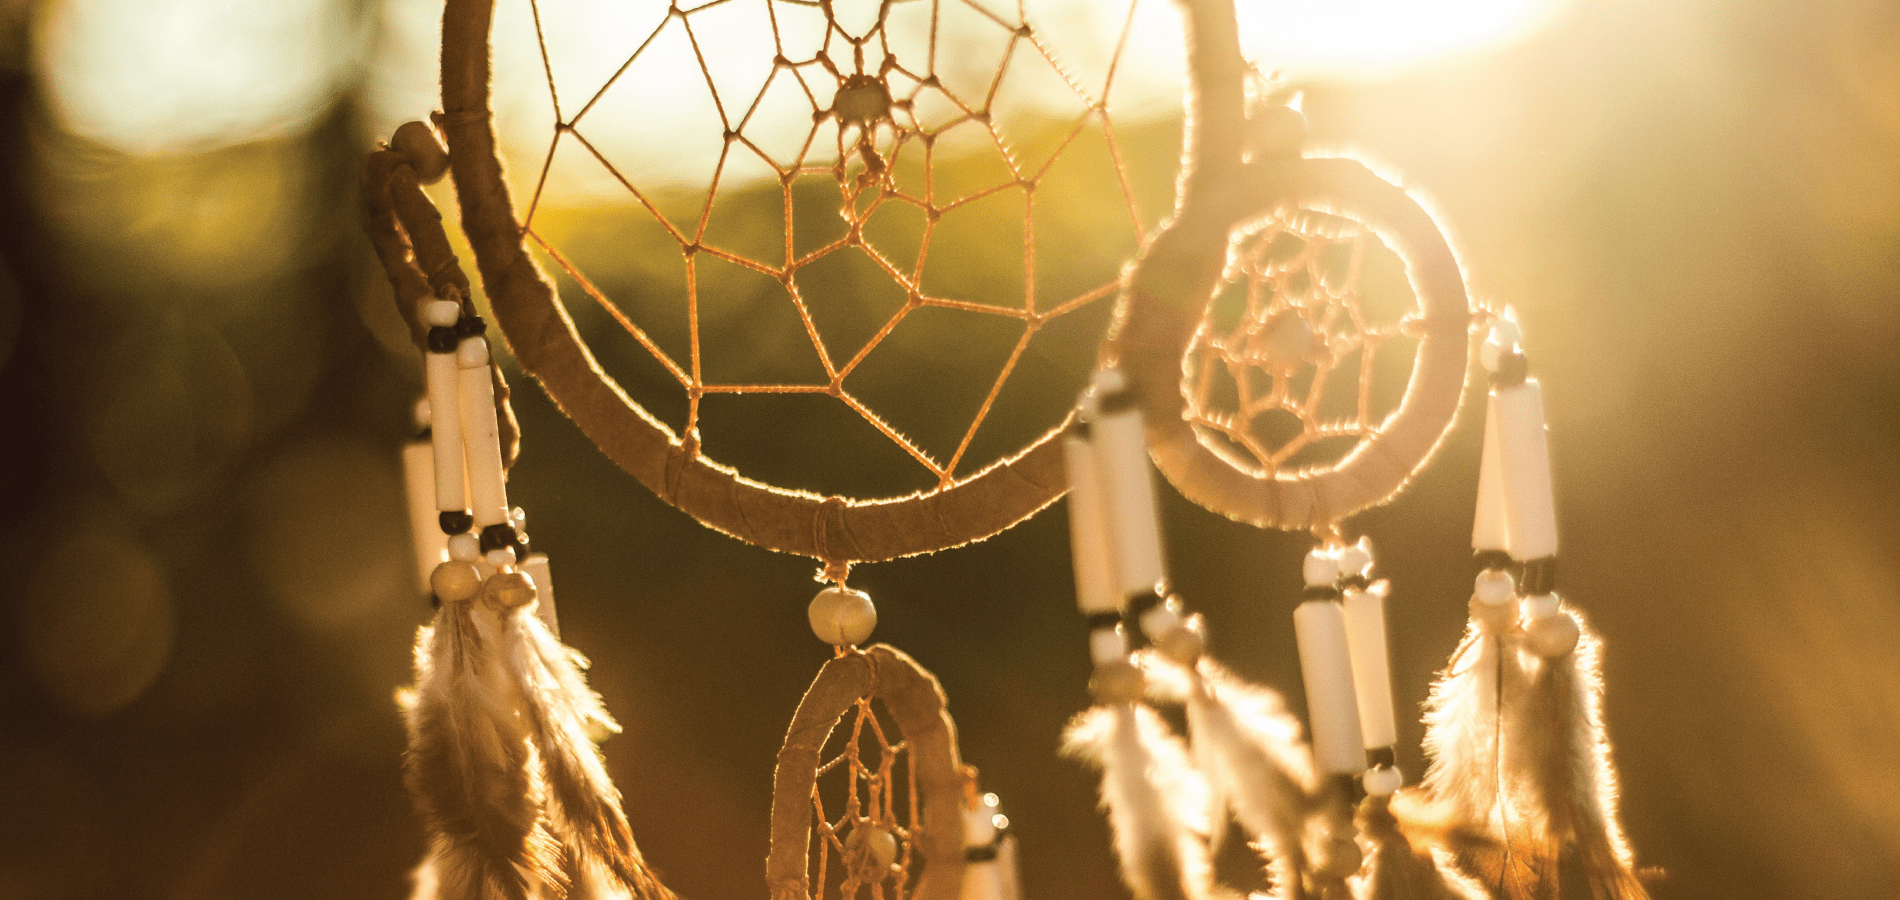 image of a dreamcatcher